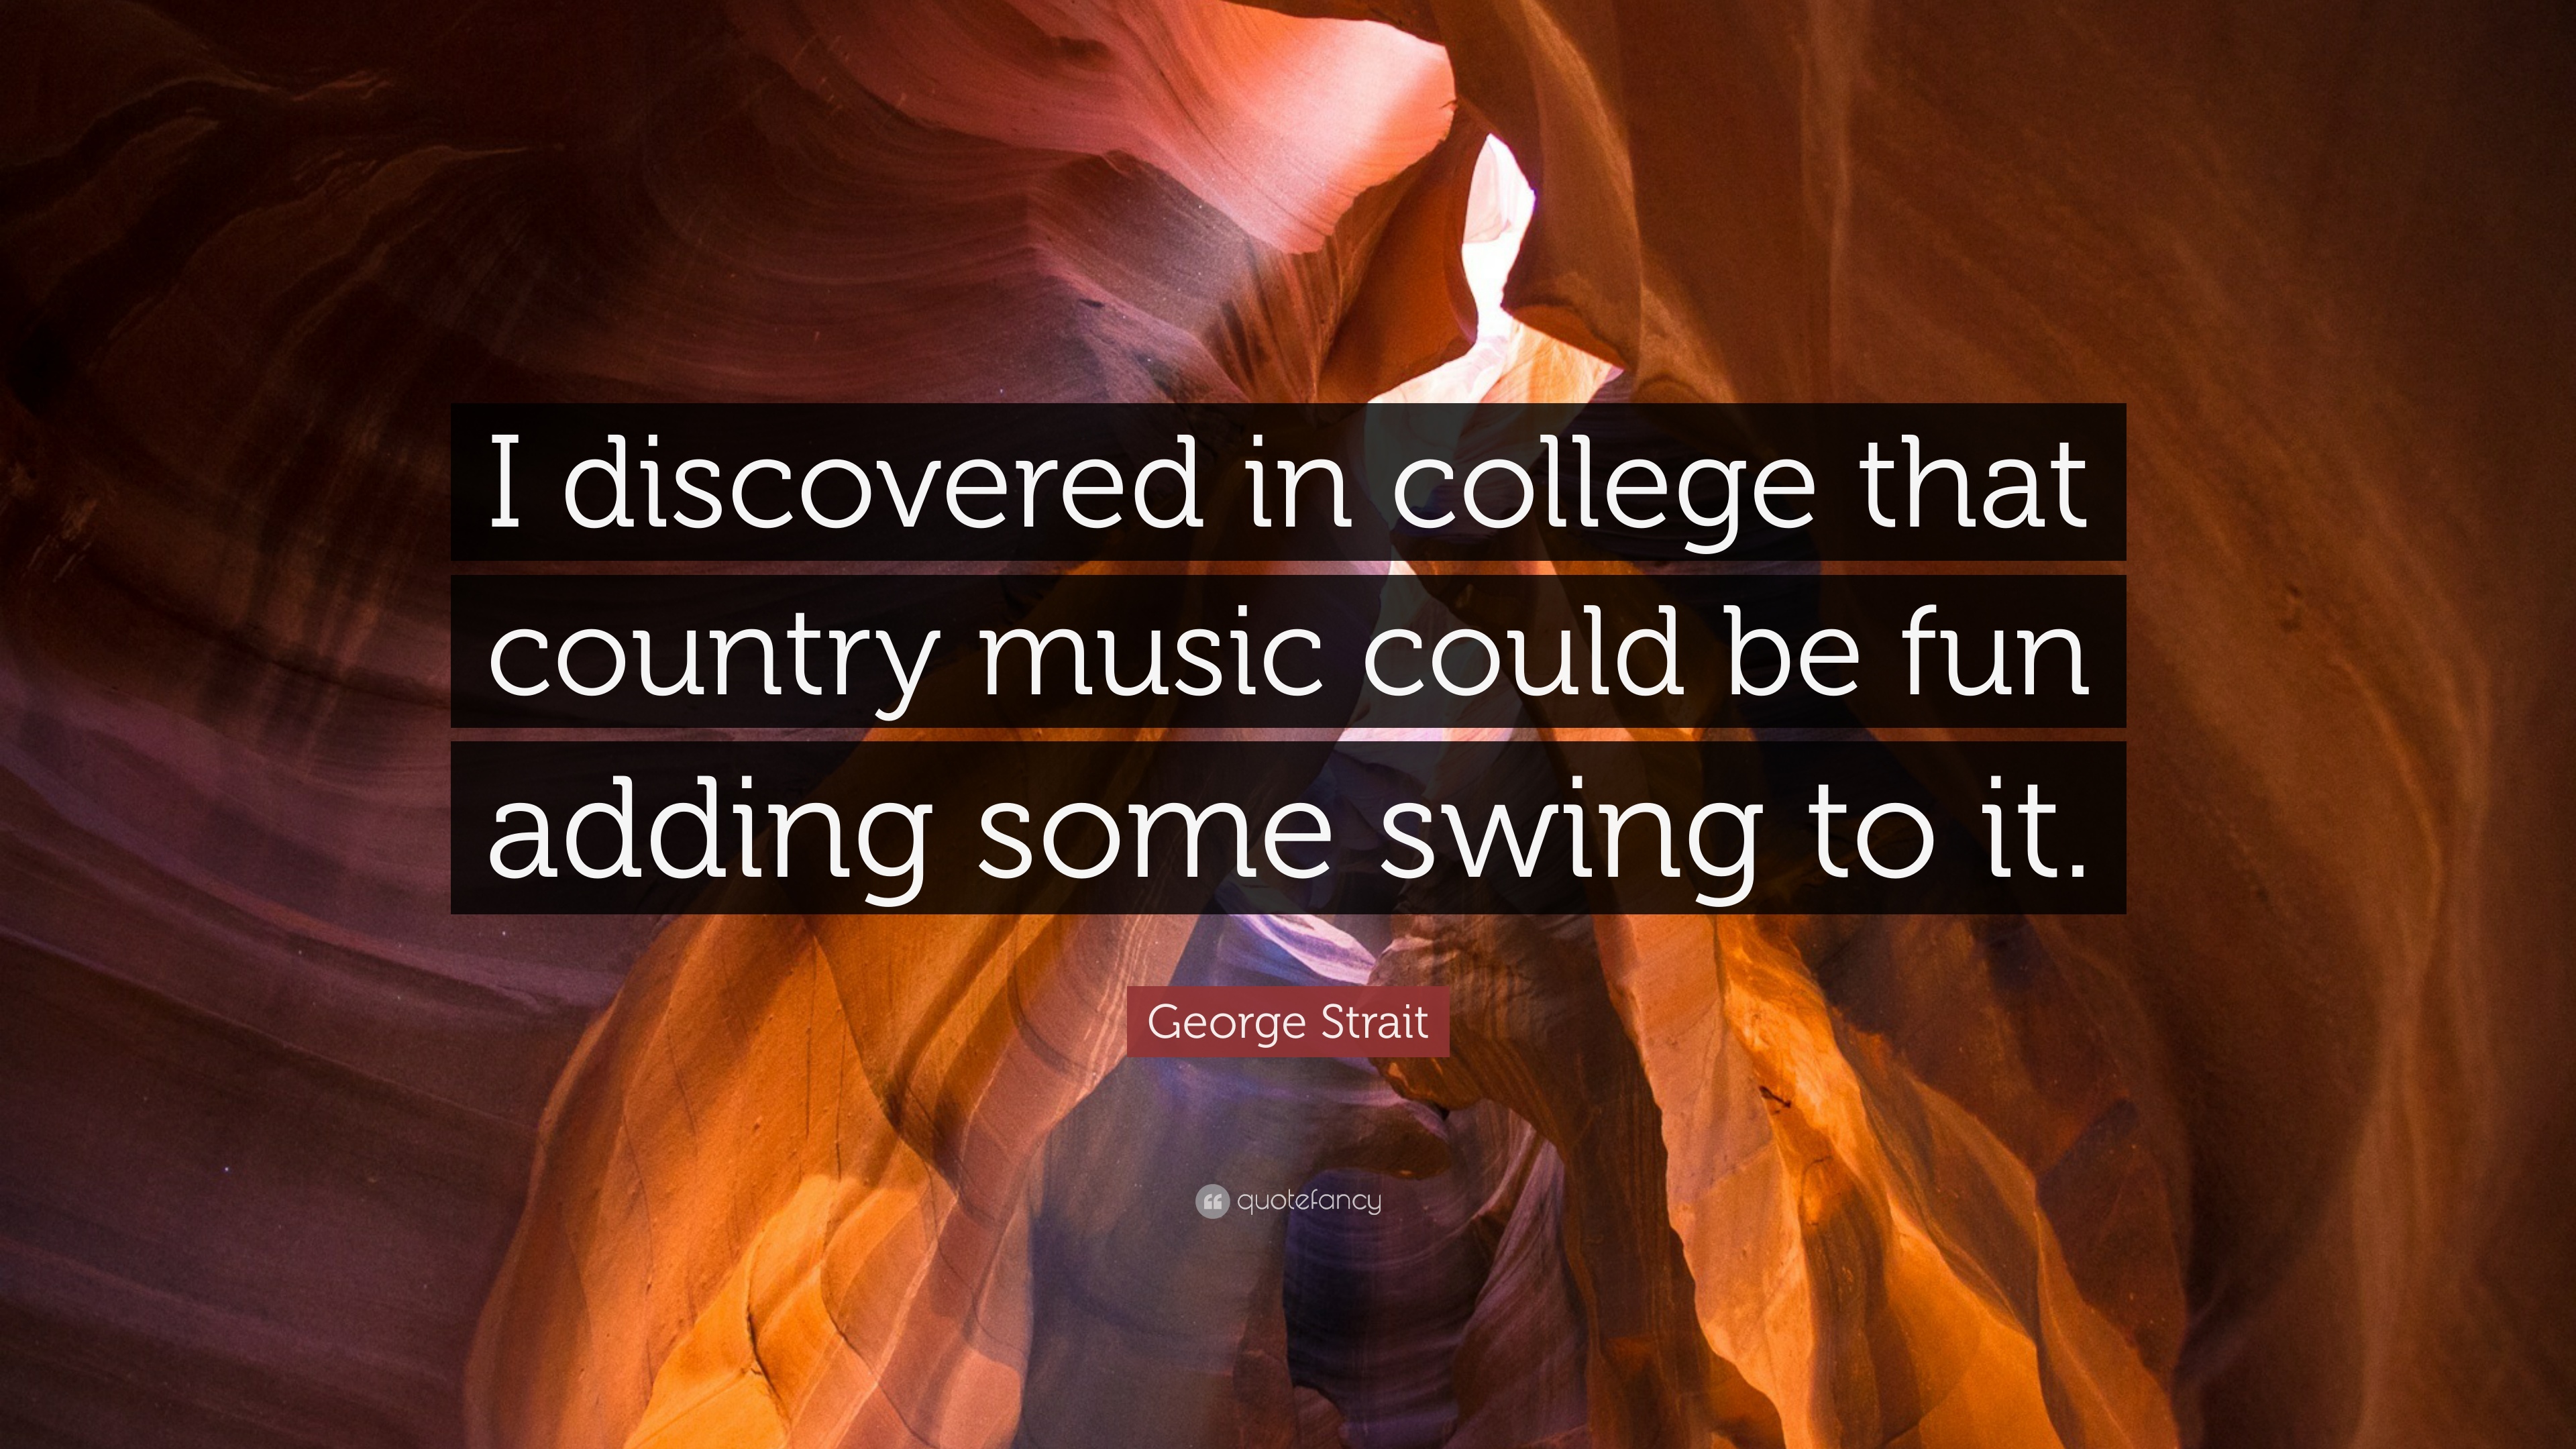 George Strait Quote: “I discovered in college that country music